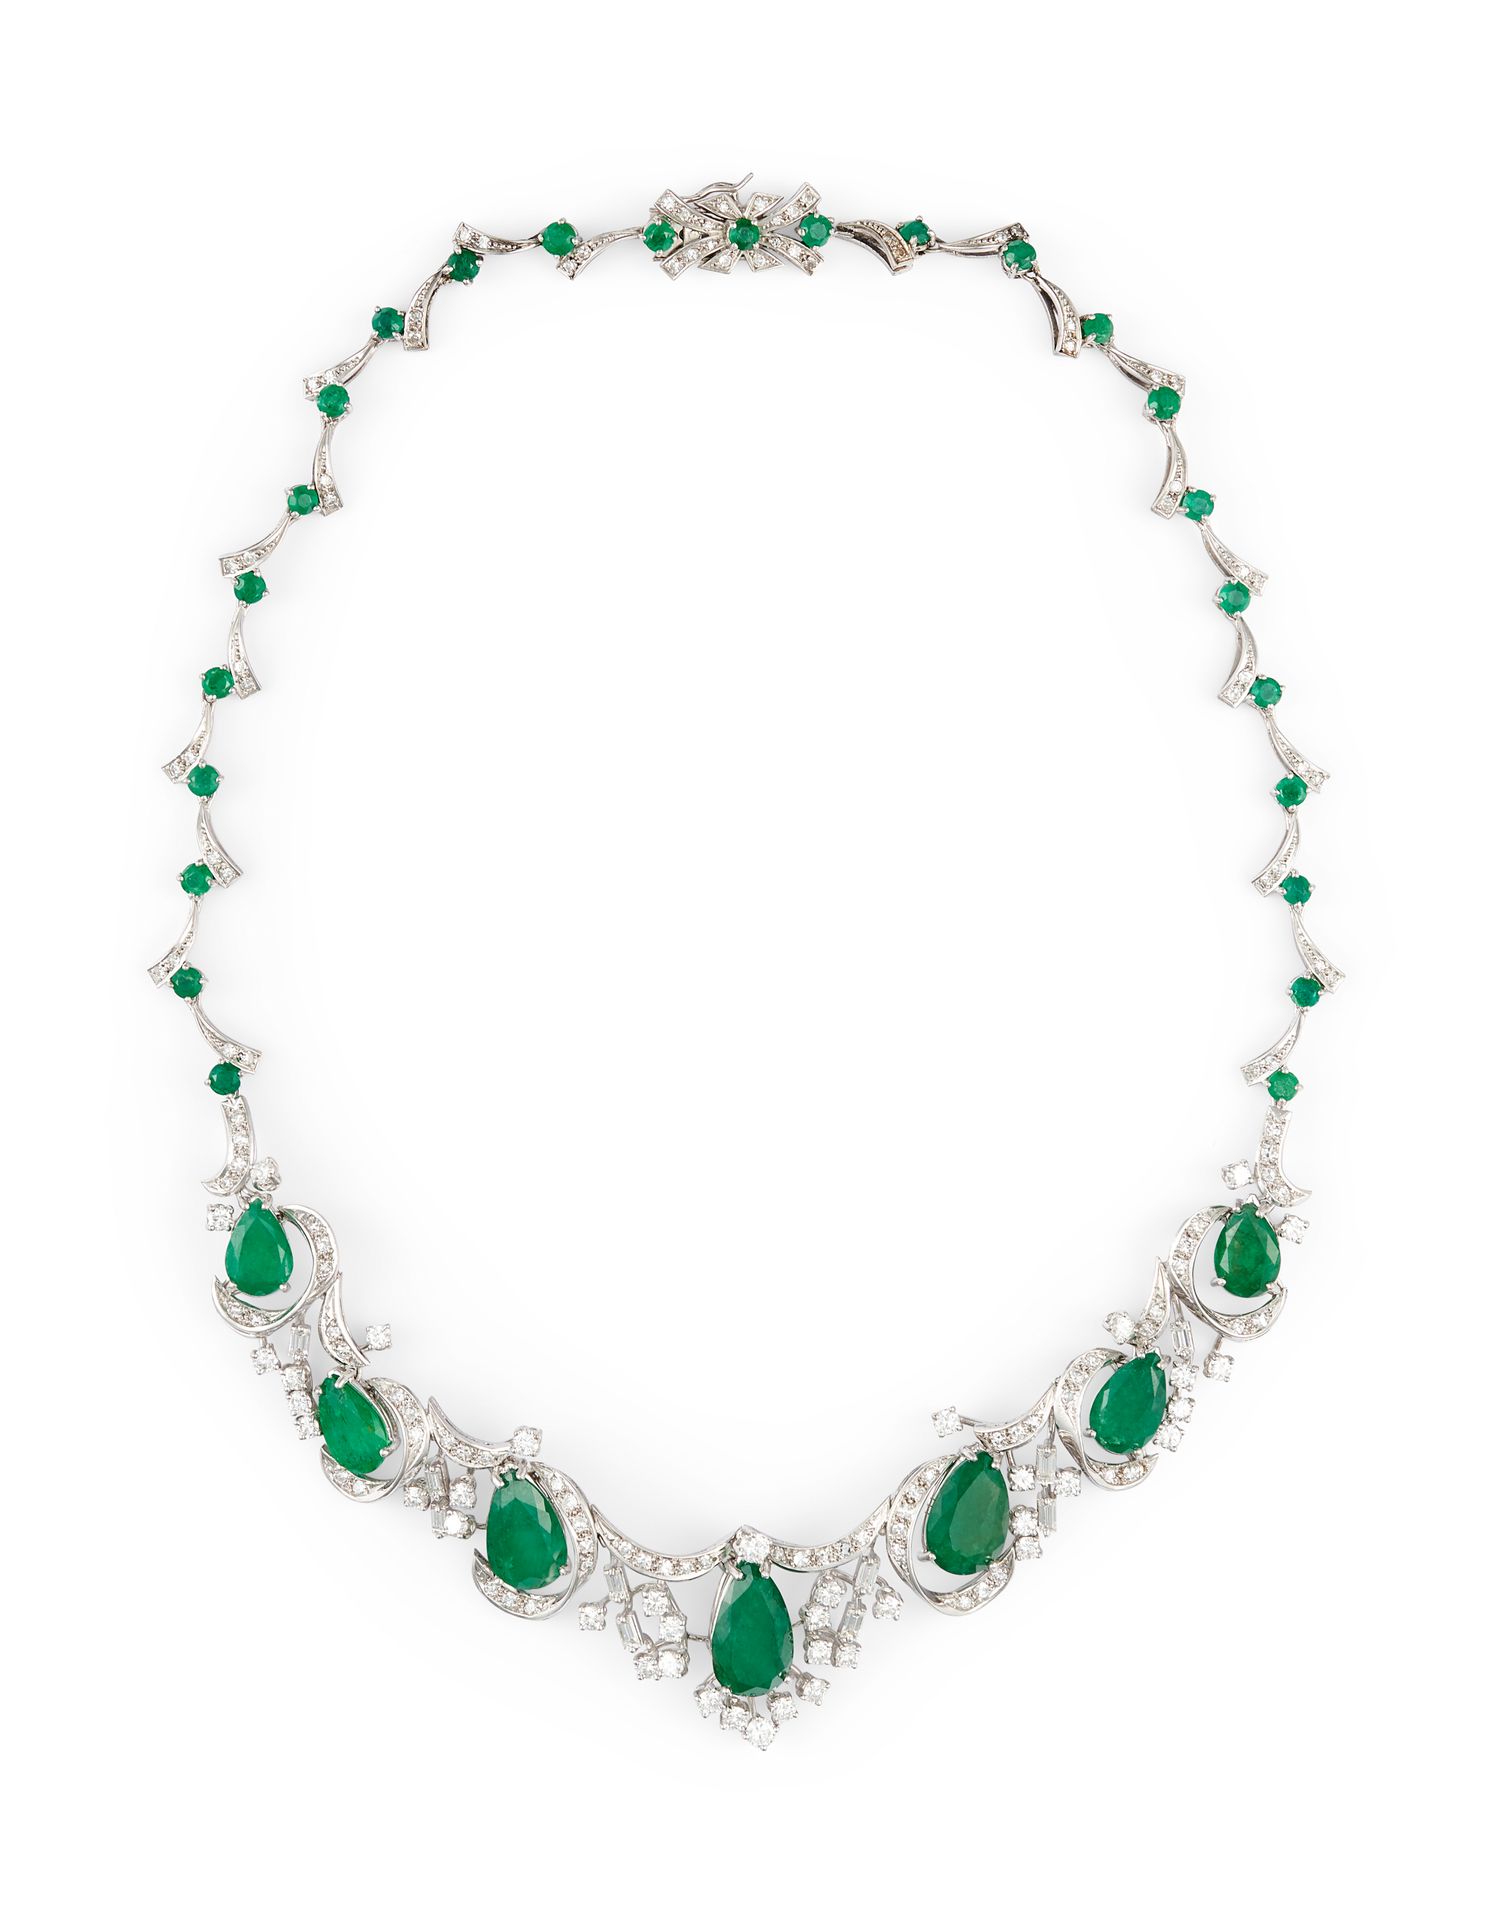 Null EMERALD AND DIAMOND NECKLACE In 18K white gold, set with 7 pear-shaped emer&hellip;